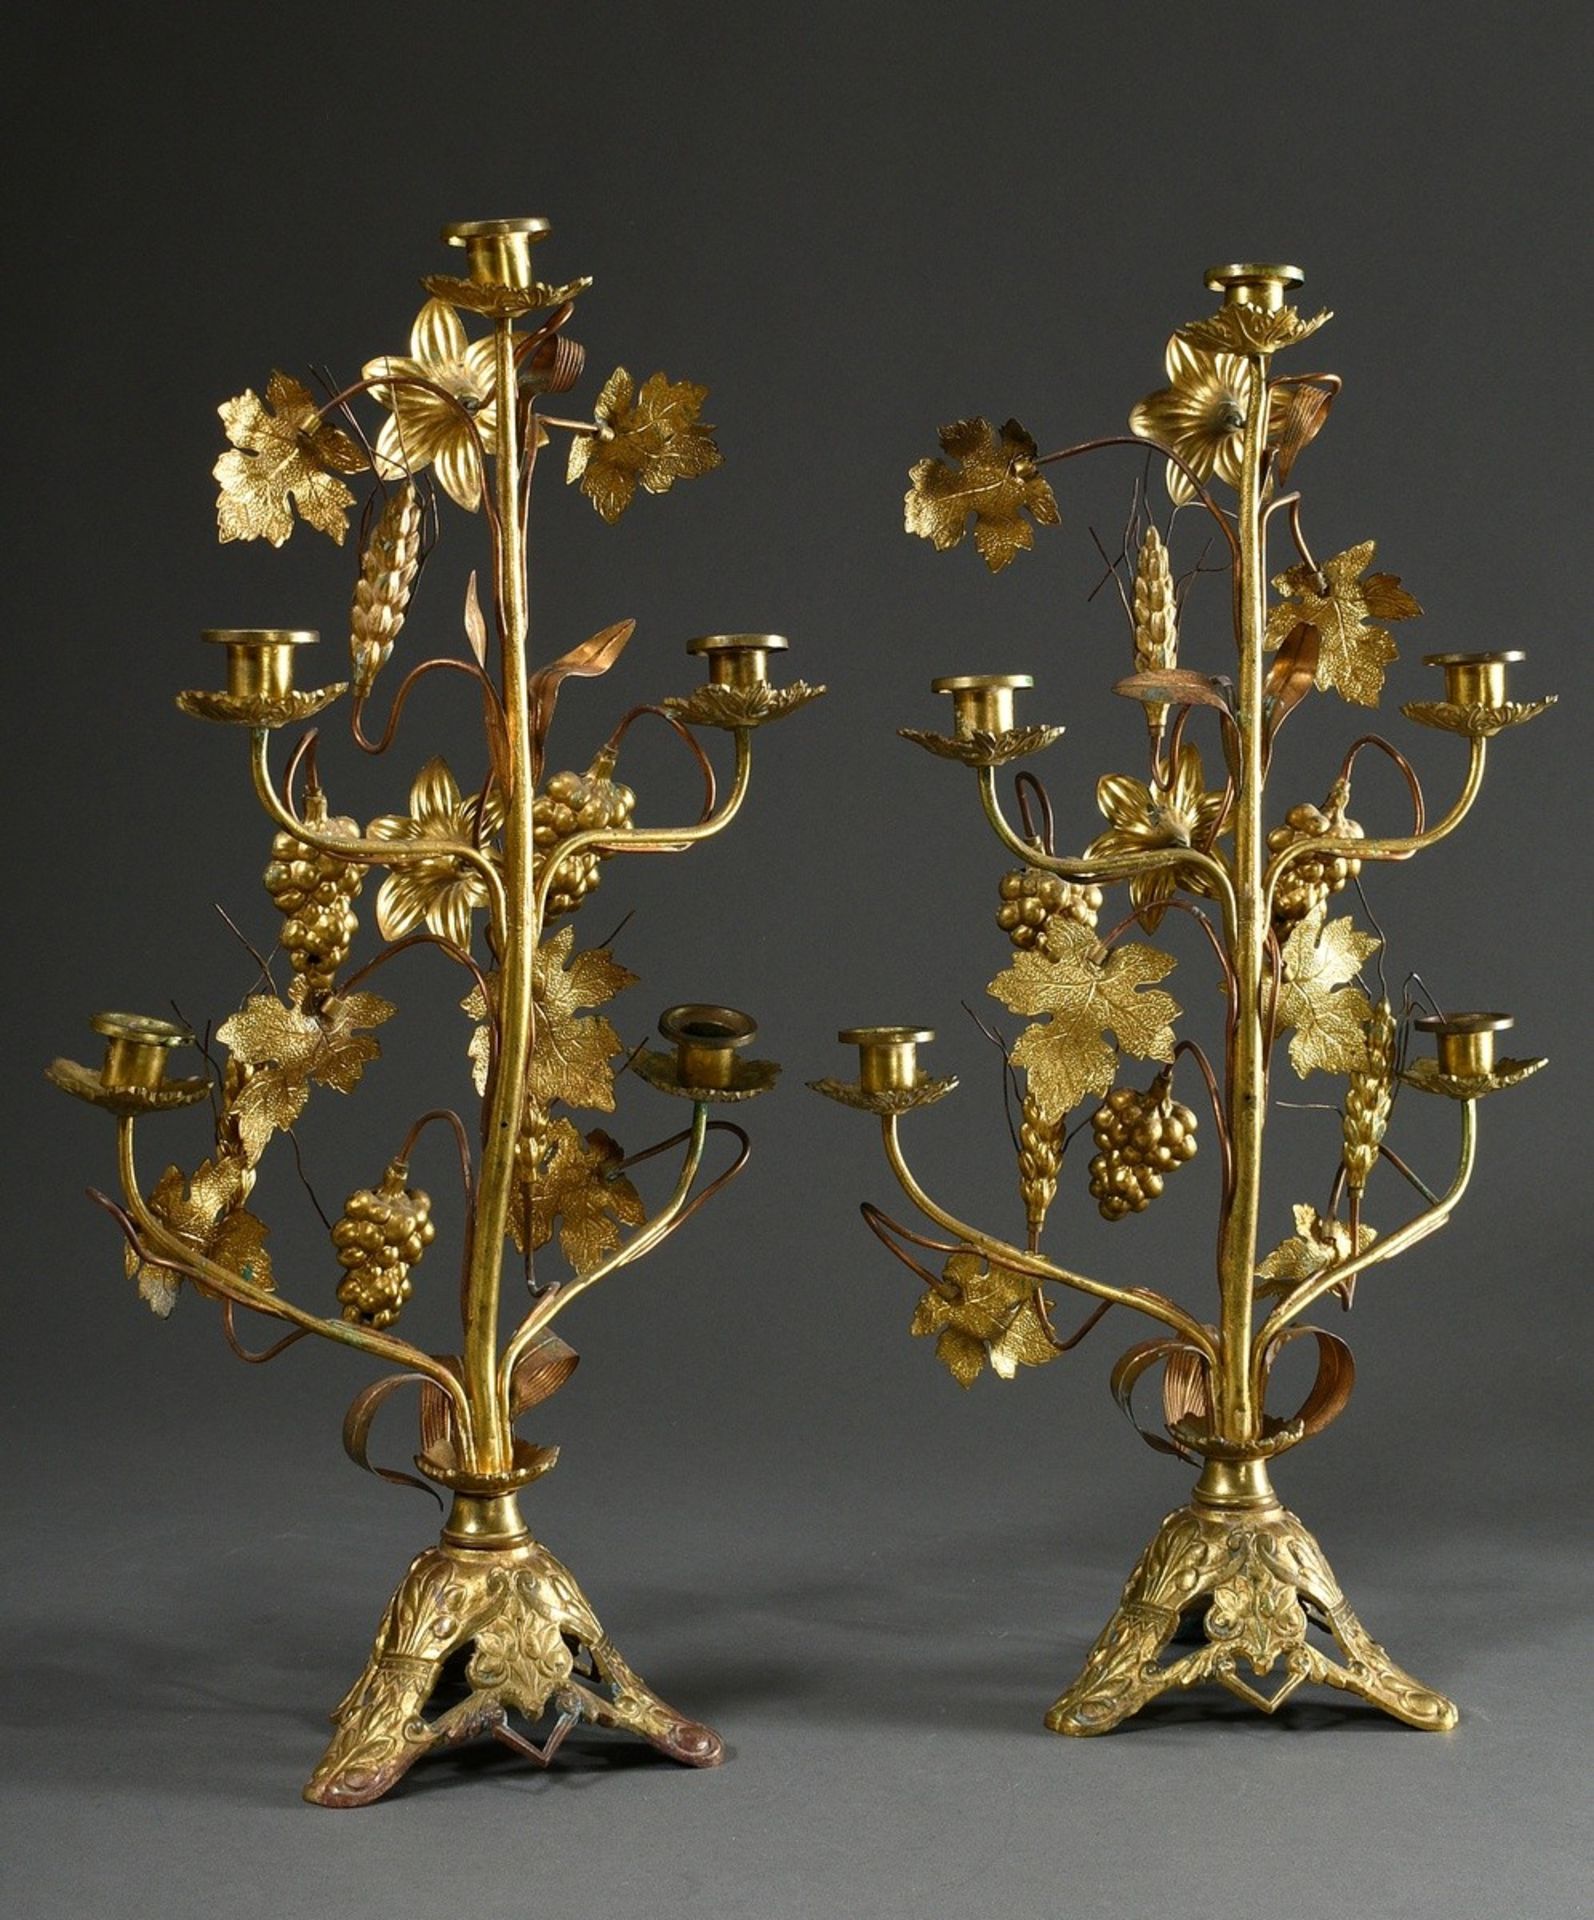 Pair of Marian or altar candlesticks with sculptural lily blossoms, grapes and ears of grain on orn - Image 4 of 6